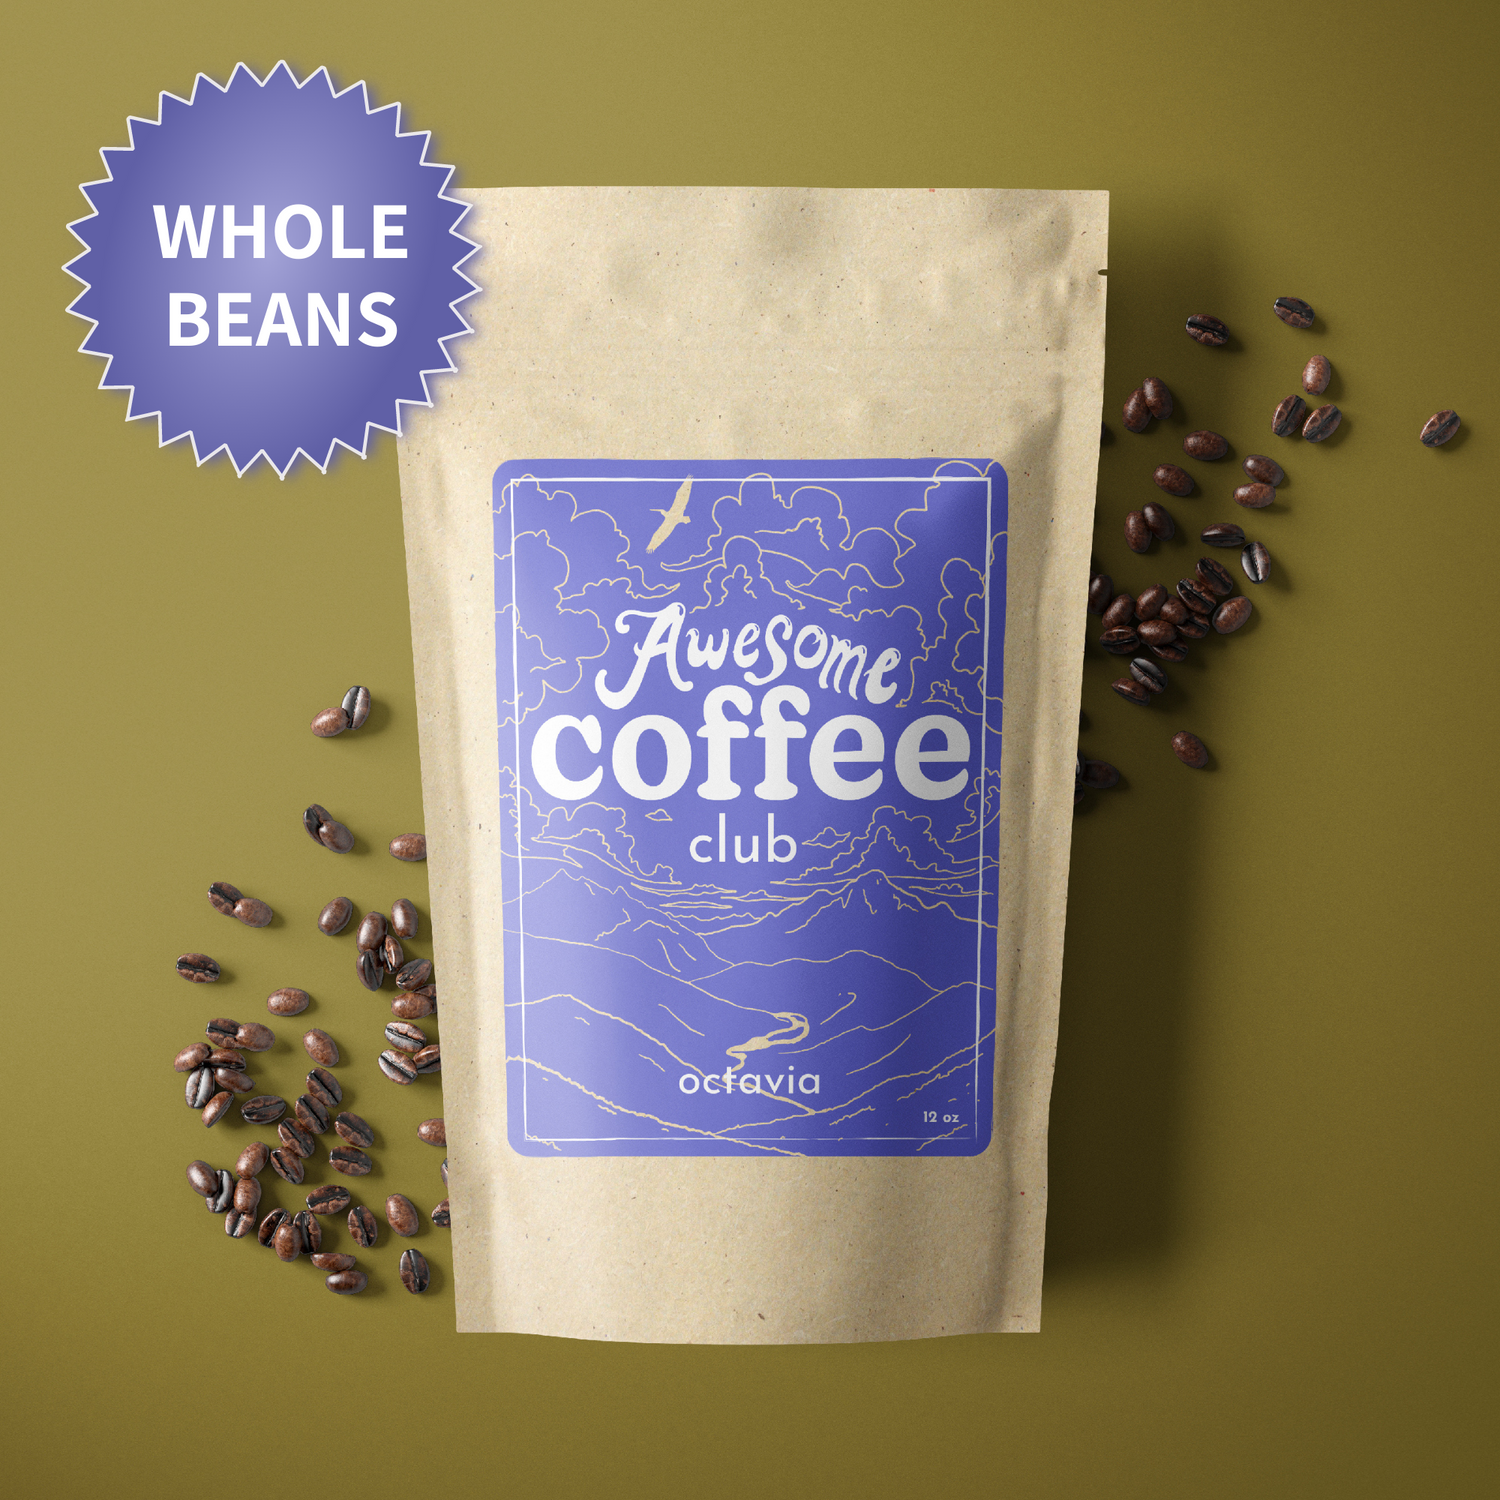 A photo of a brown bag of coffee with a light purple label that shows a mountain scene and has the text "Awesome Coffee Club; Octavia". The bag sites atop a dark yellow/green background with whole beans spread around it. There is a purple badge in the lefthand corner that reads "Whole Beans". 